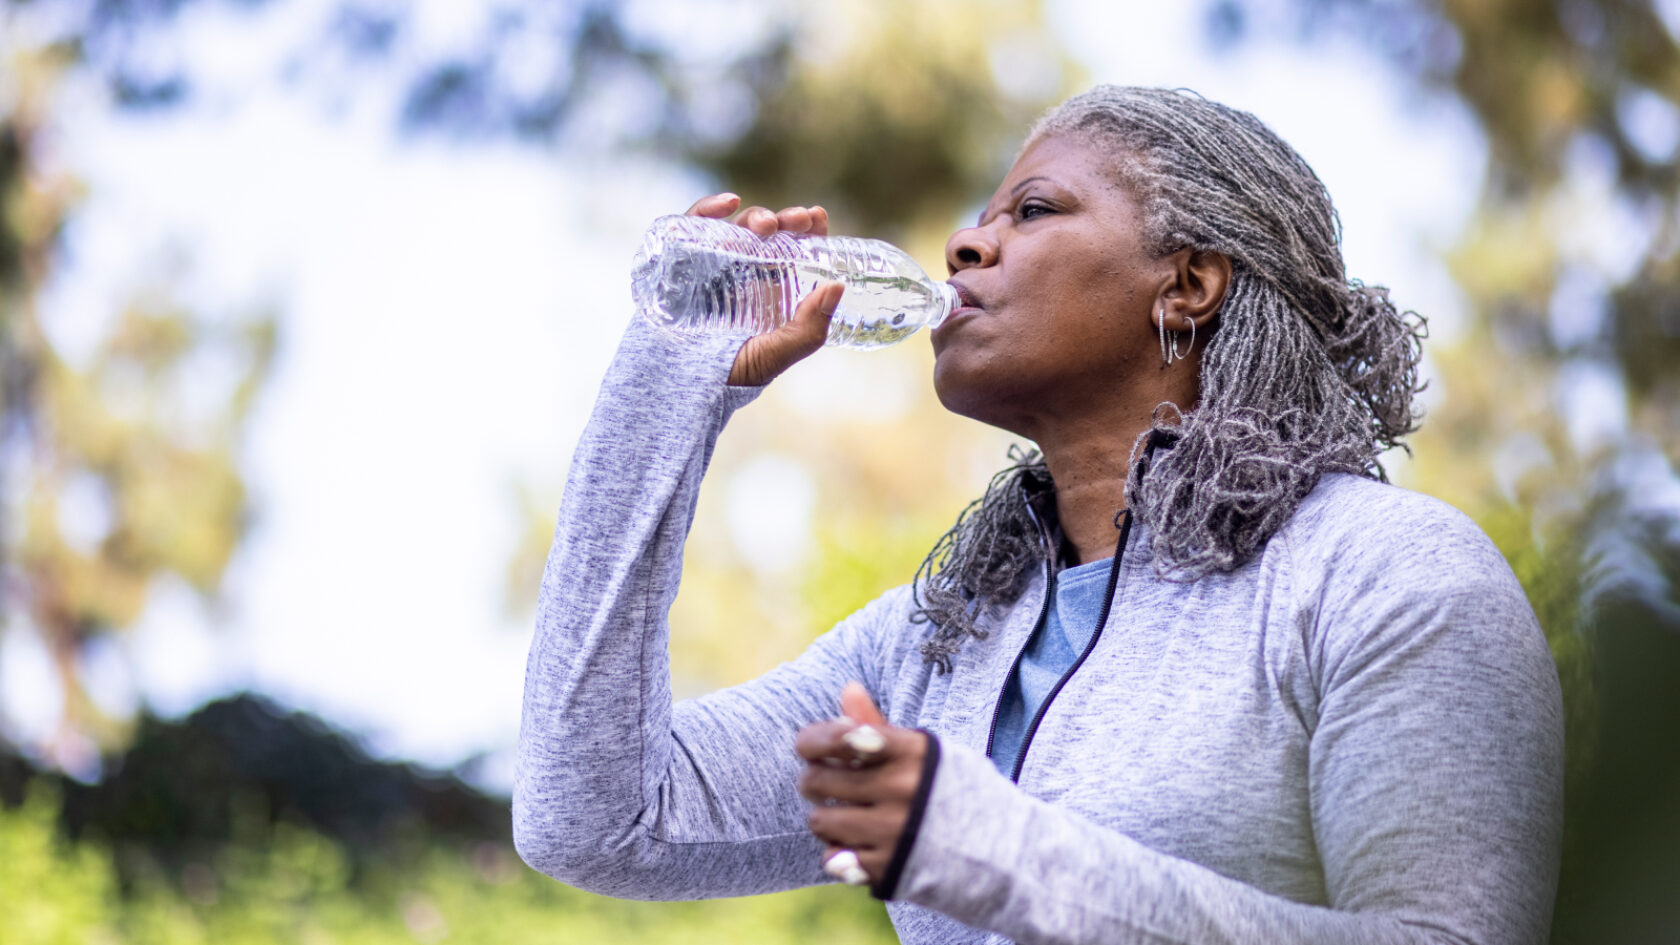 A woman stays hydrated while out exercising.